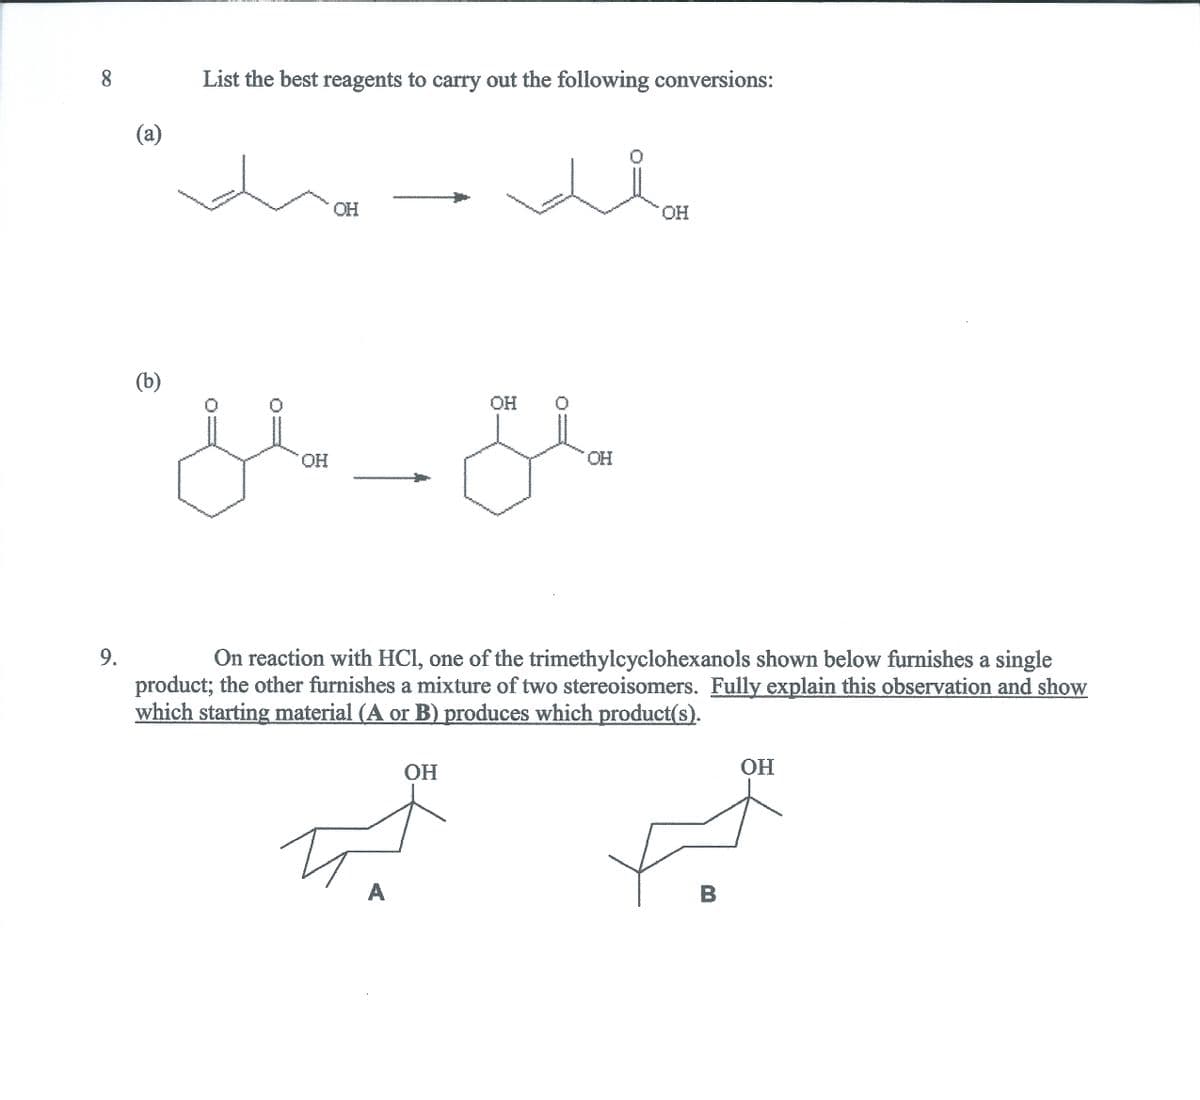 8.
List the best reagents to carry out the following conversions:
(a)
OH
(b)
OH
OH
HO.
product; the other furnishes a mixture of two stereoisomers. Fully explain this observation and show
which starting material (A or B) produces which product(s).
9.
On reaction with HCl, one of the trimethylcyclohexanols shown below furnishes a single
HO.
OH
B
A
